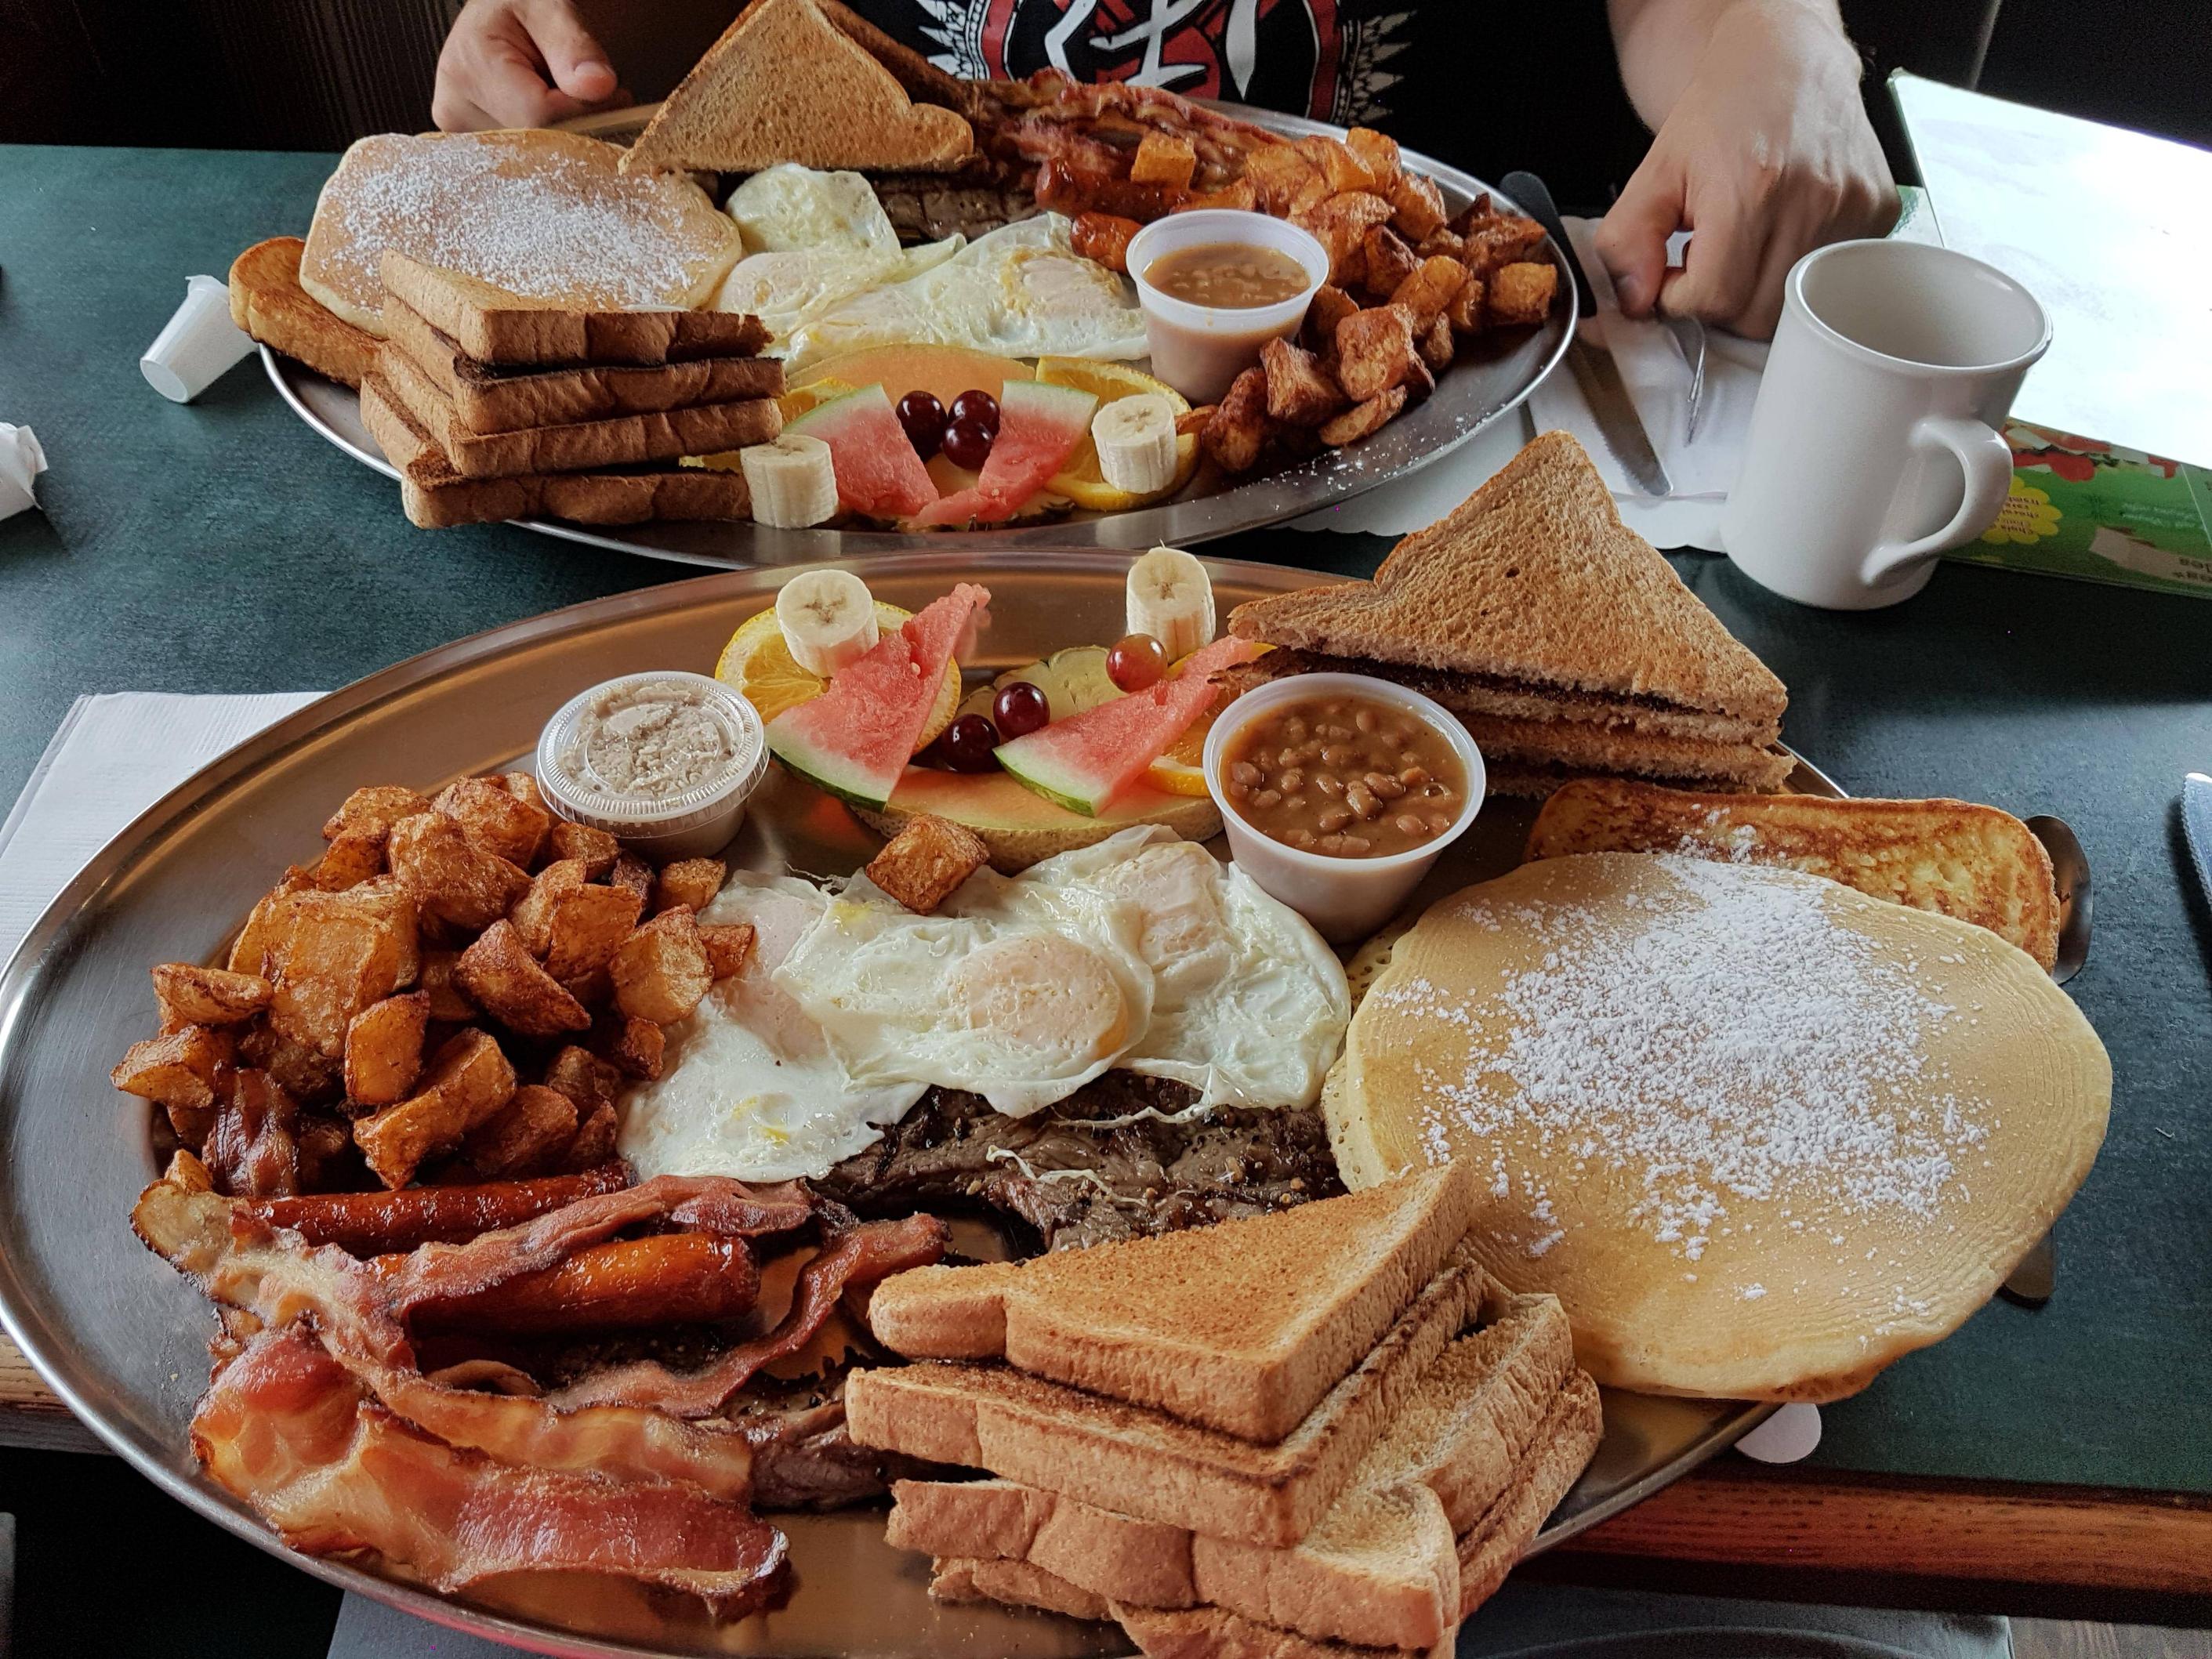 My friend and I just had this huge breakfast. - Album on Imgur